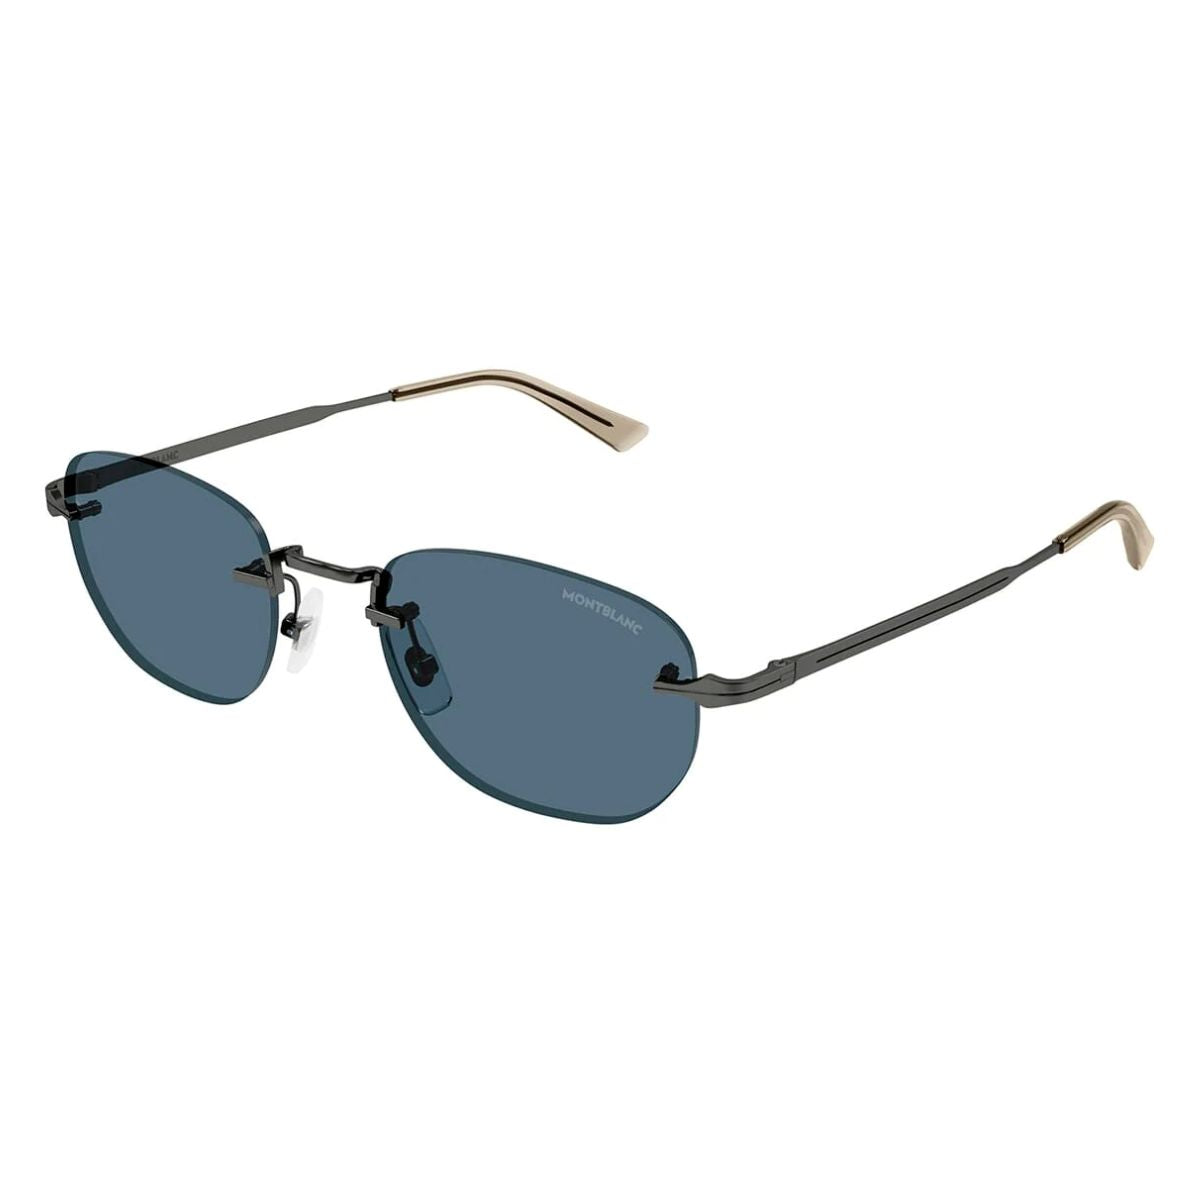 "2. Mont Blanc 0303 002 Sunglass for Men | Stylish UV Protection Shades - Gun metal and bio nylon construction for top branded sunglasses."